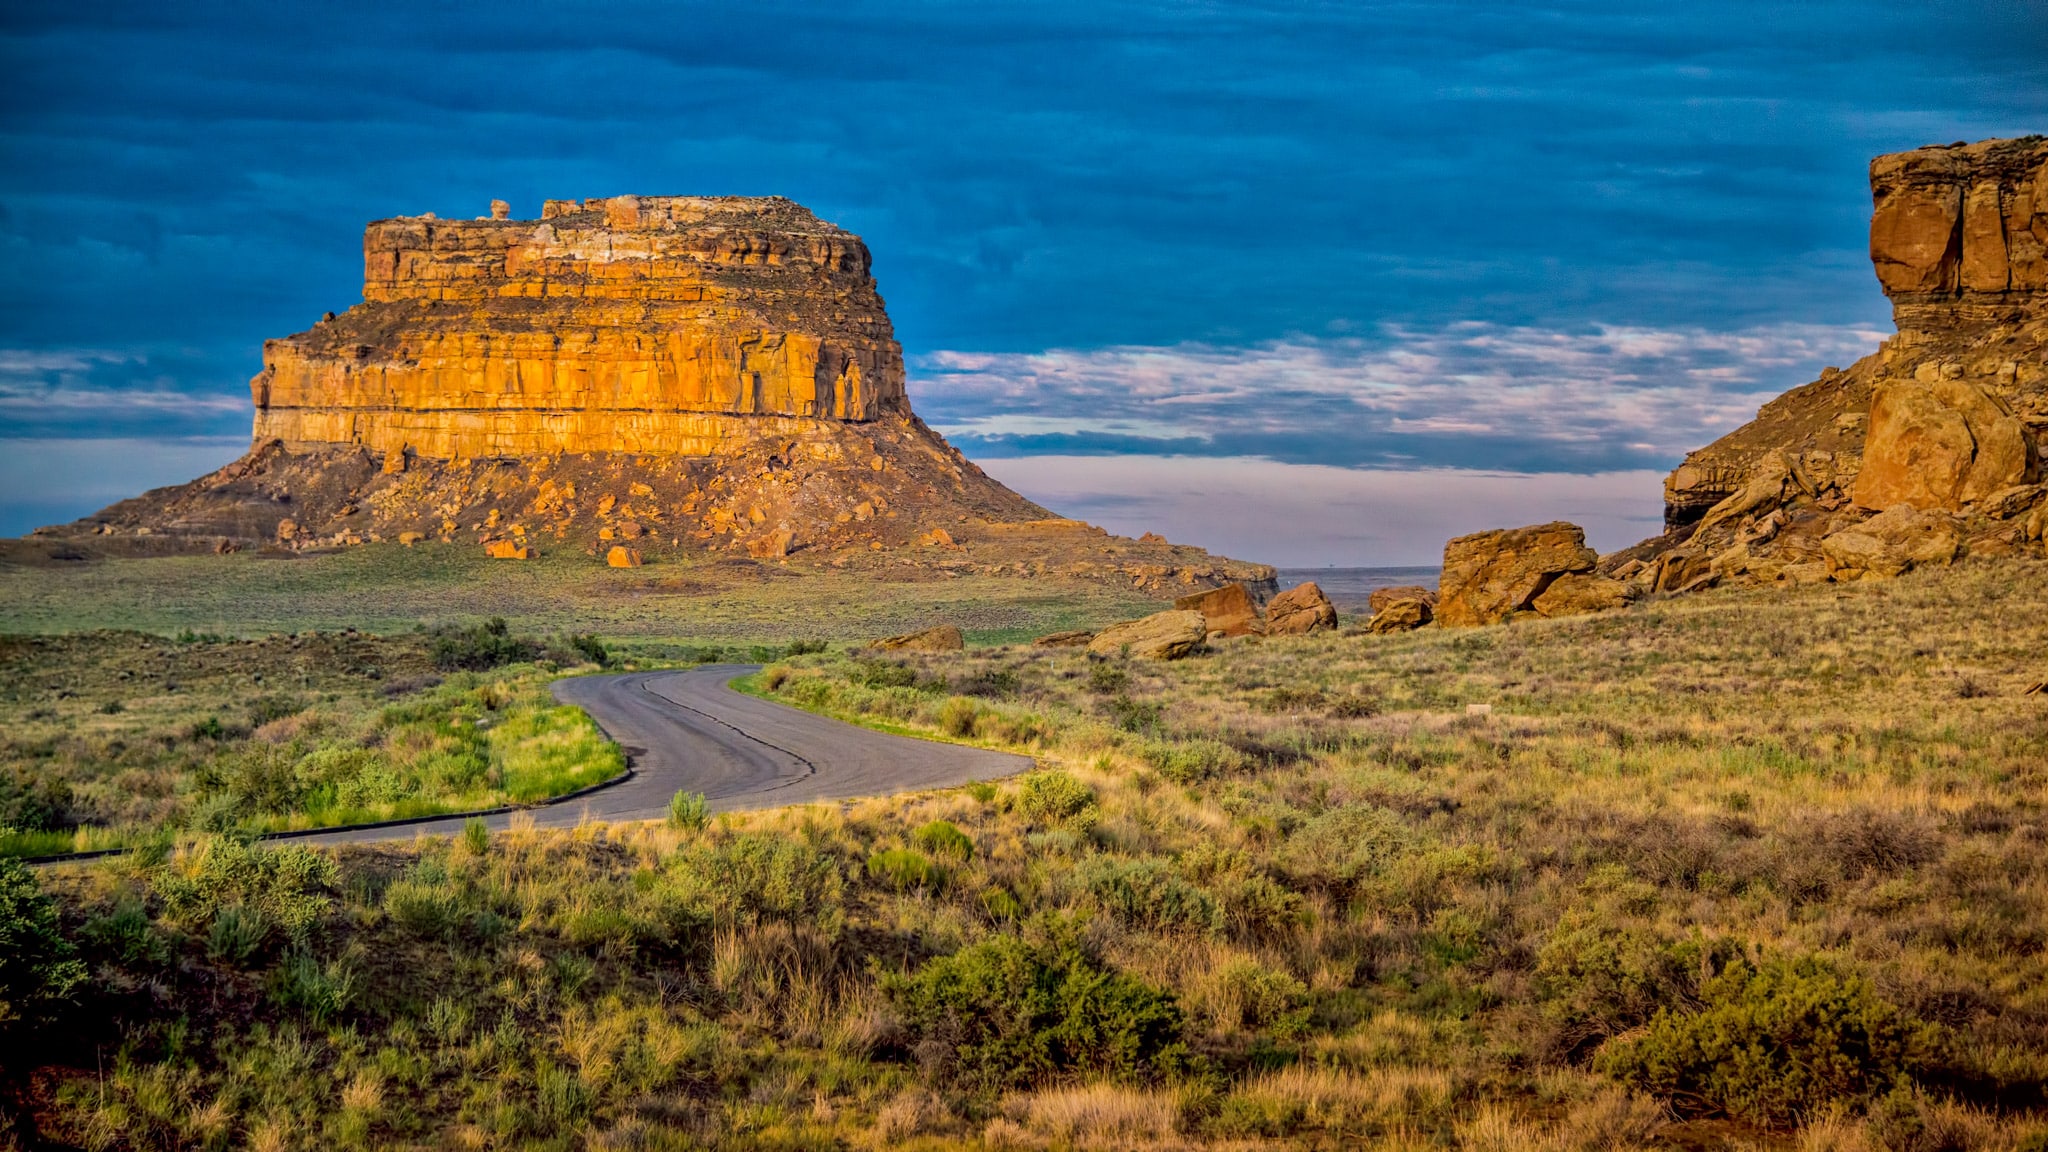 Angry clouds of evening thunderstormshang menacingly above Fajada Butte In Chaco Culture National Historical Park in Chaco Wash, New Mexico.